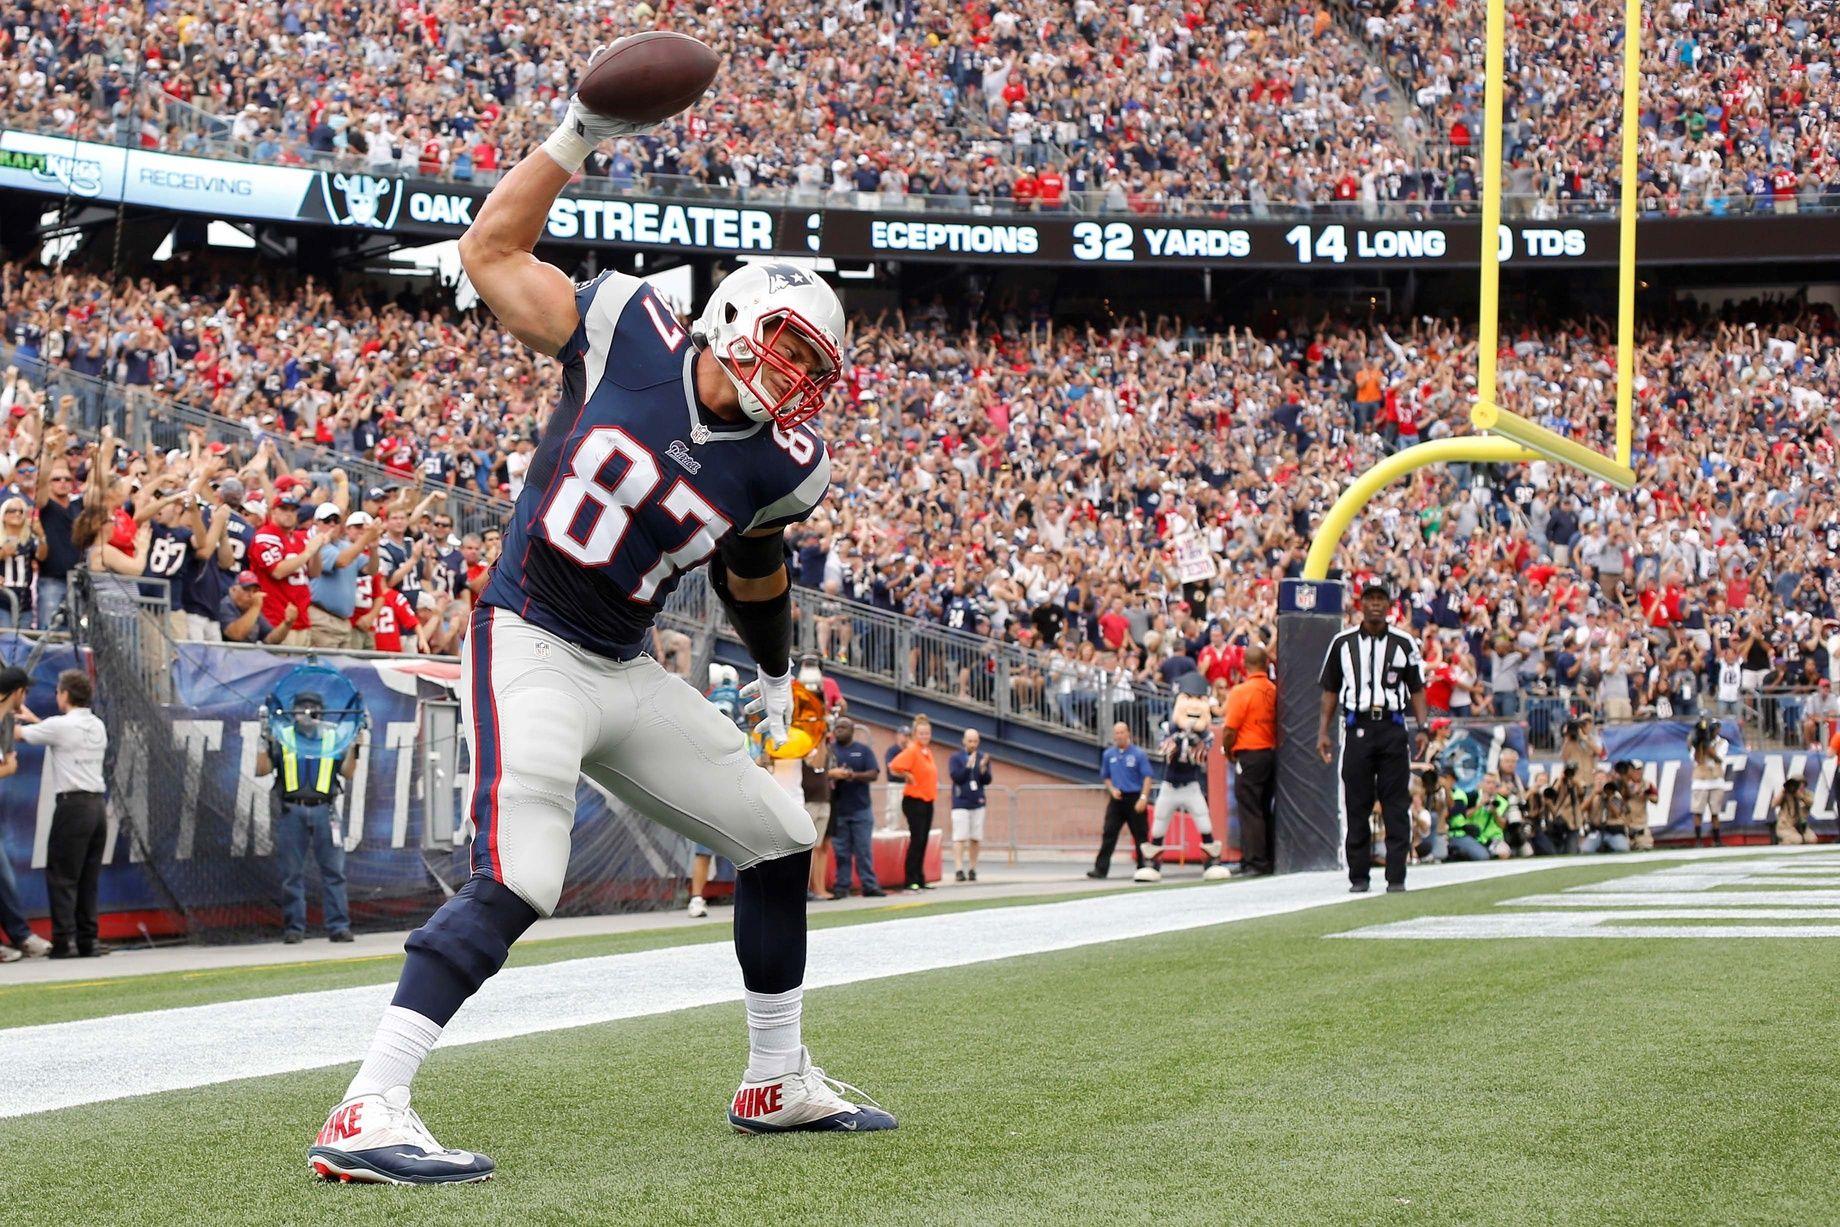 Want to meet Rob Gronkowski? Well, here's your chance